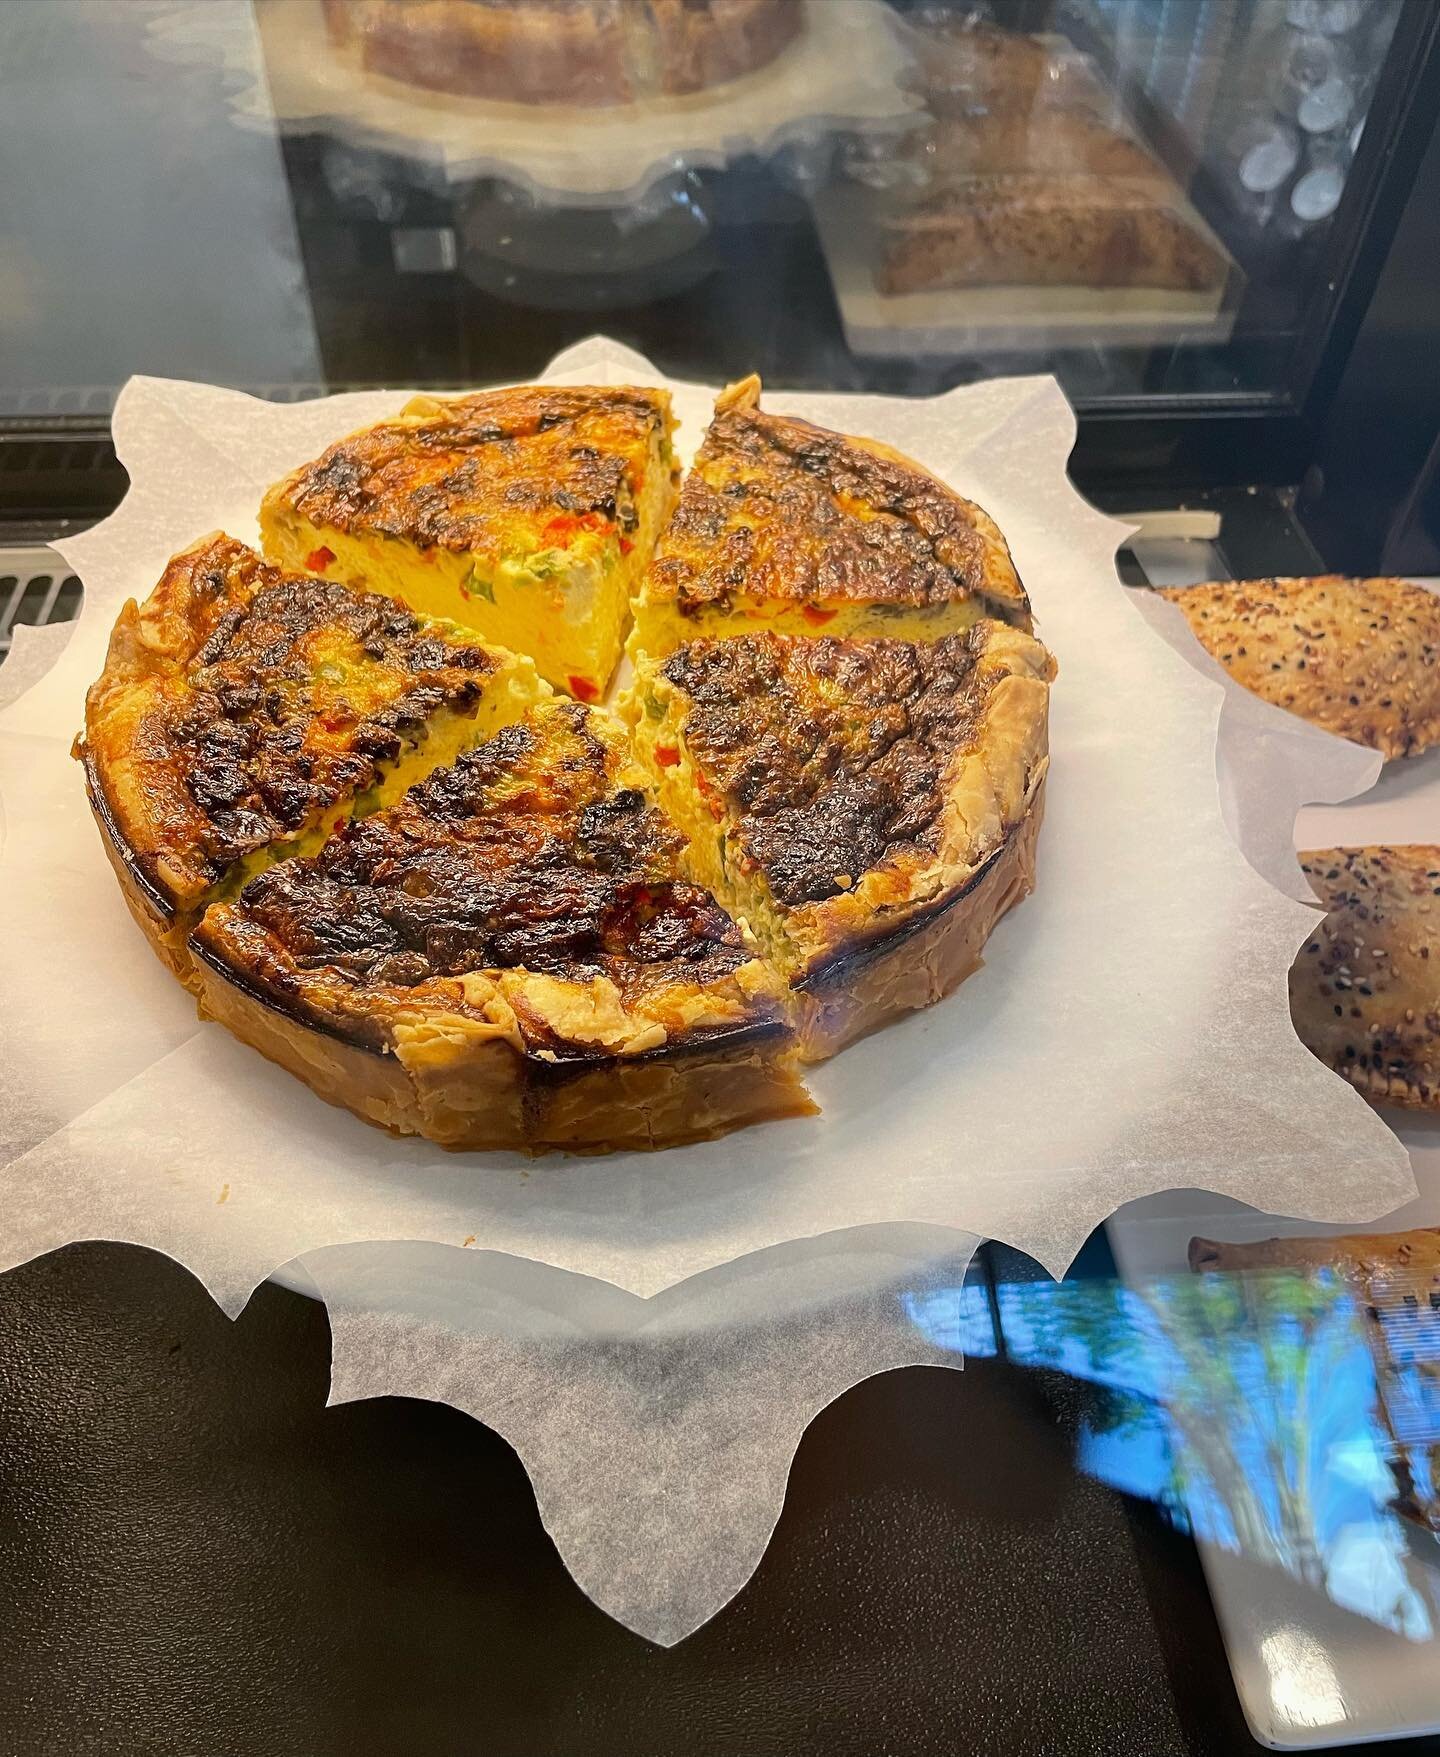 Our Veggie Quiche is a wonderful vegetarian option for breakfast! Baked fresh daily &amp; made in house by our bakery team. 

housemade pastry crust | savory egg custard | bell pepper | onion | mushroom | feta